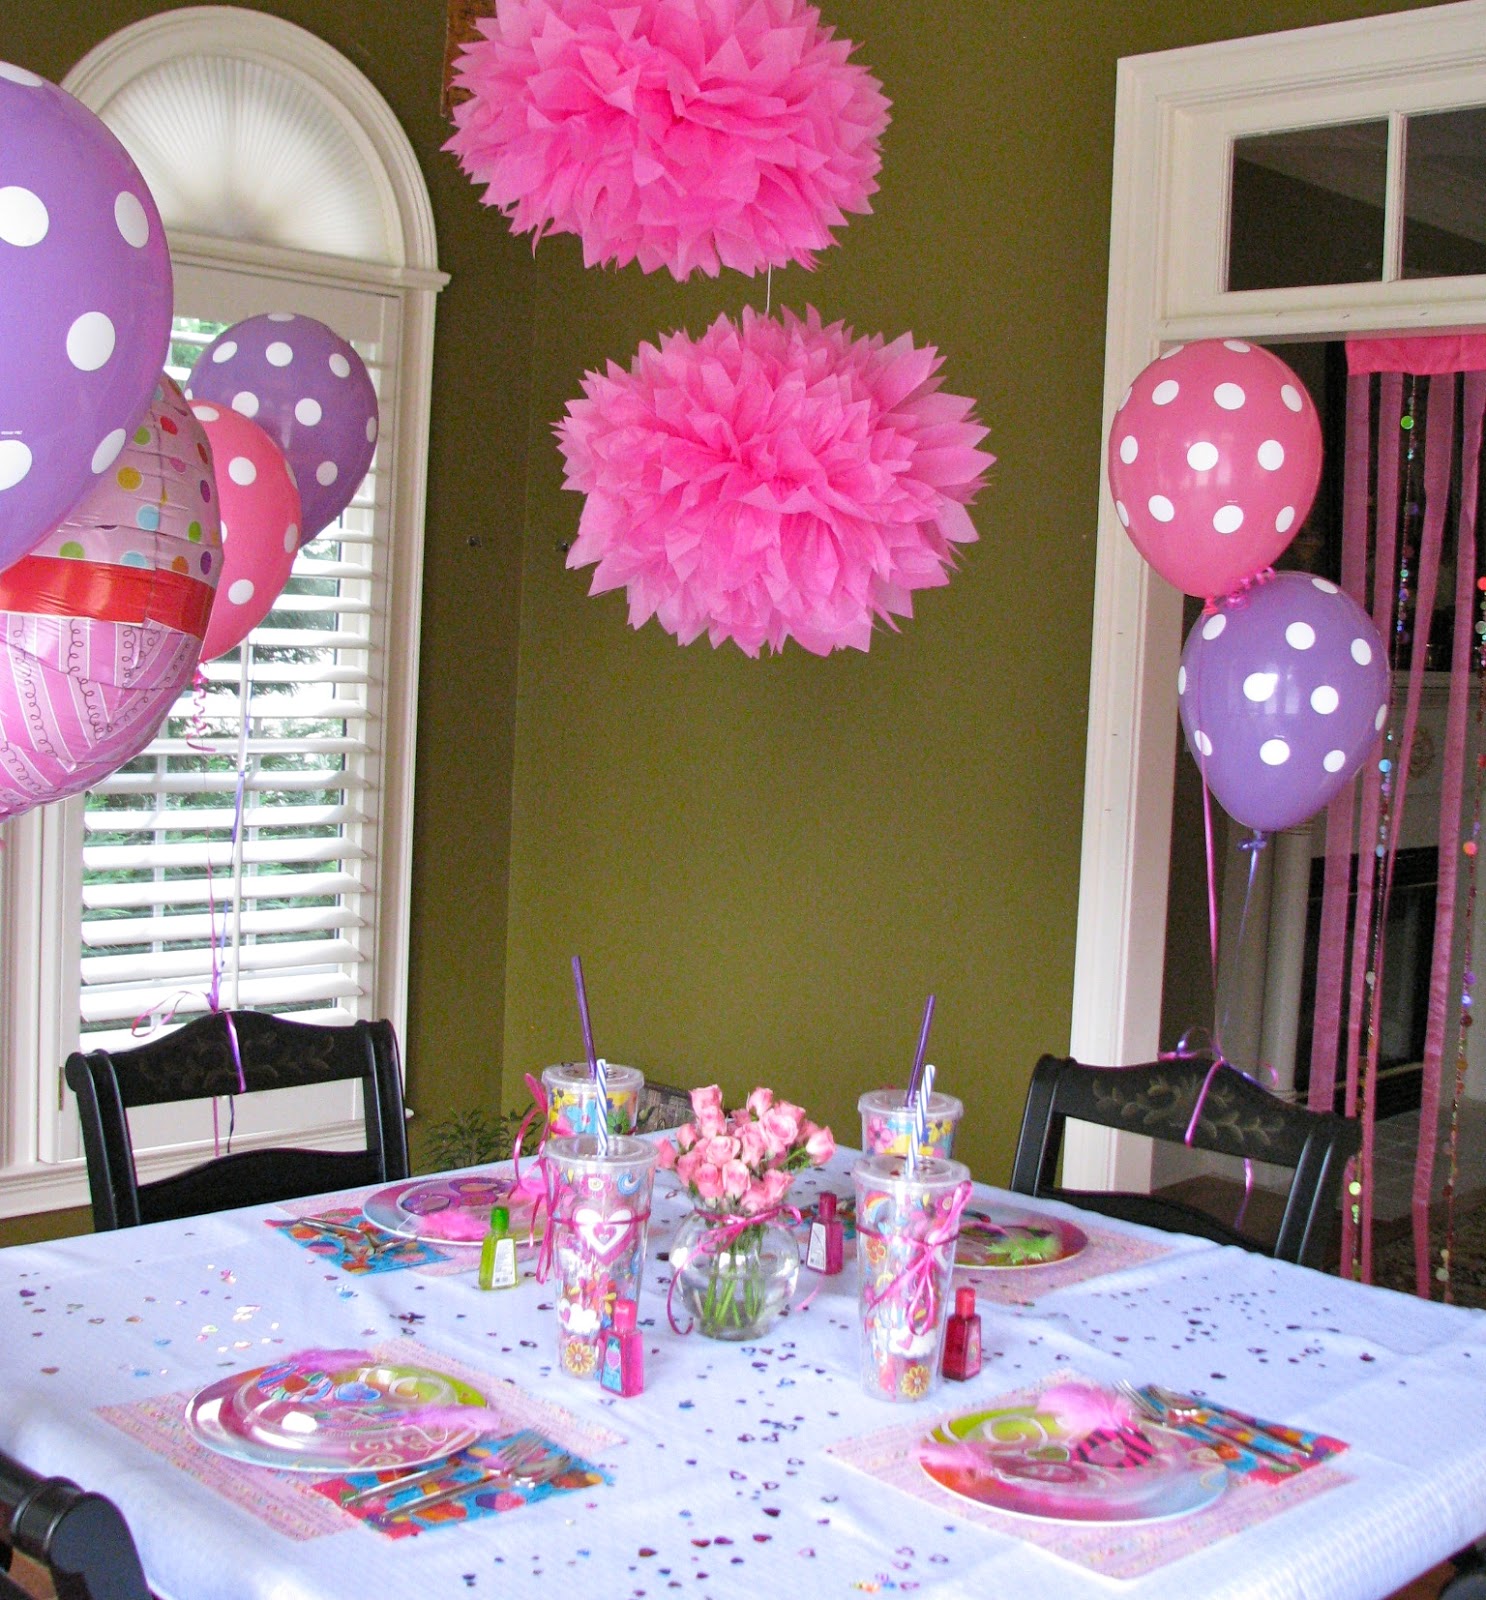 HomeMadeville Your Place For HomeMade Inspiration Girl s Birthday Party Decorations